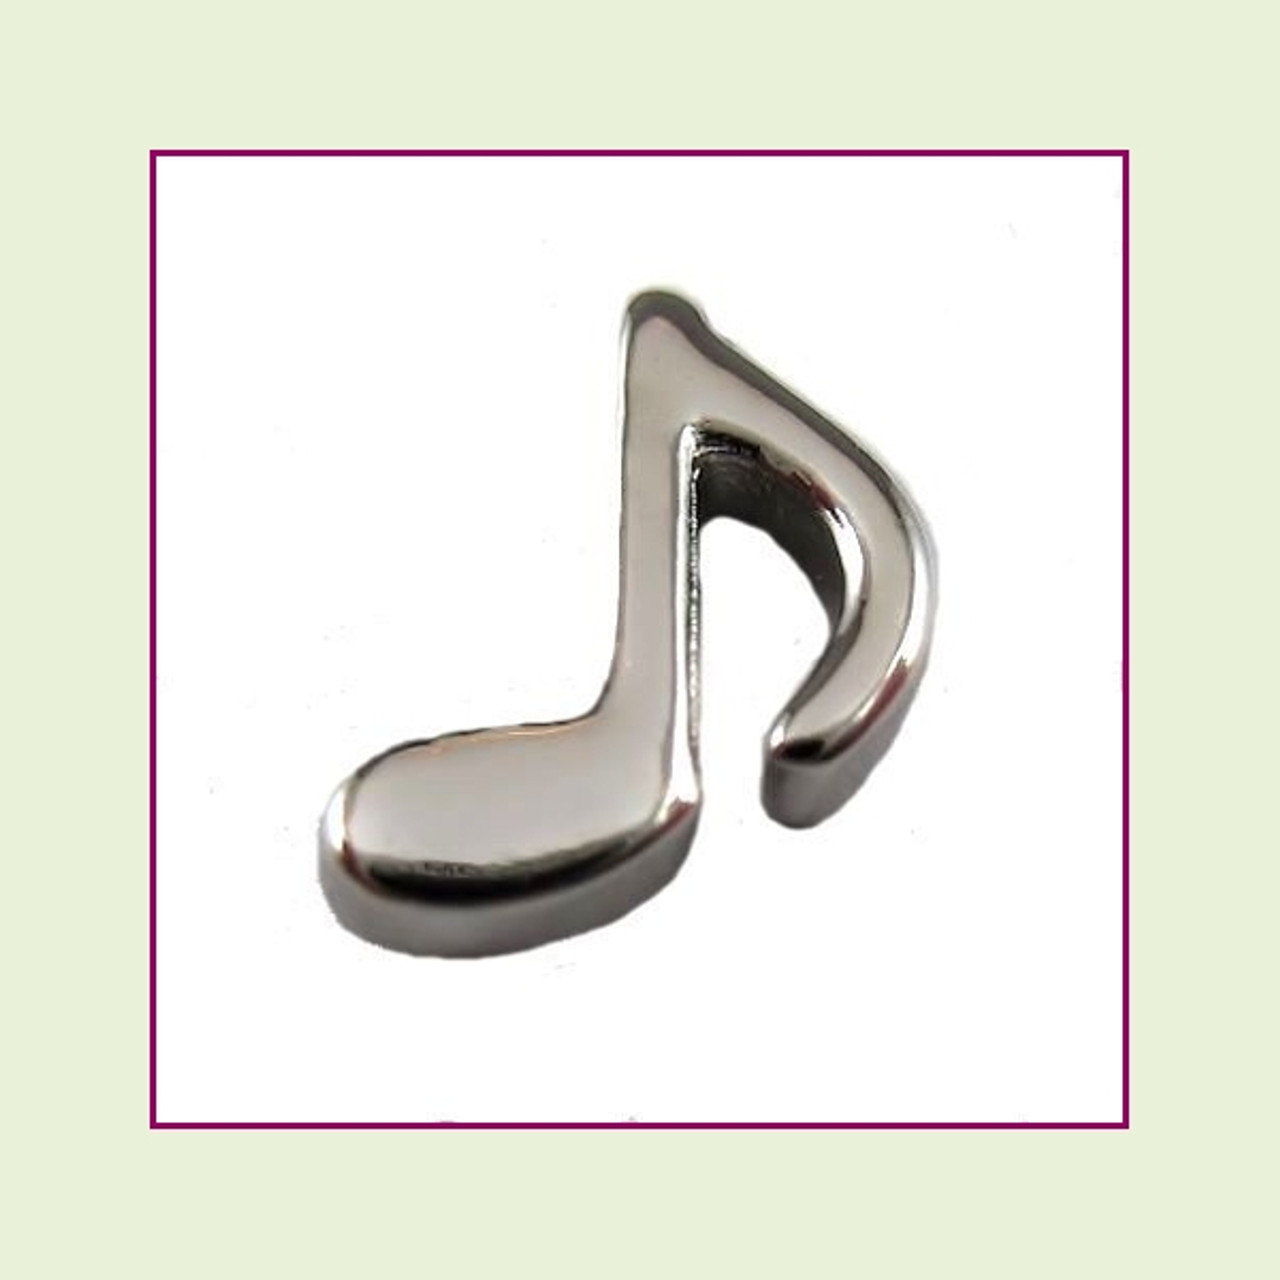 Musical 8th Note Silver Floating Charm